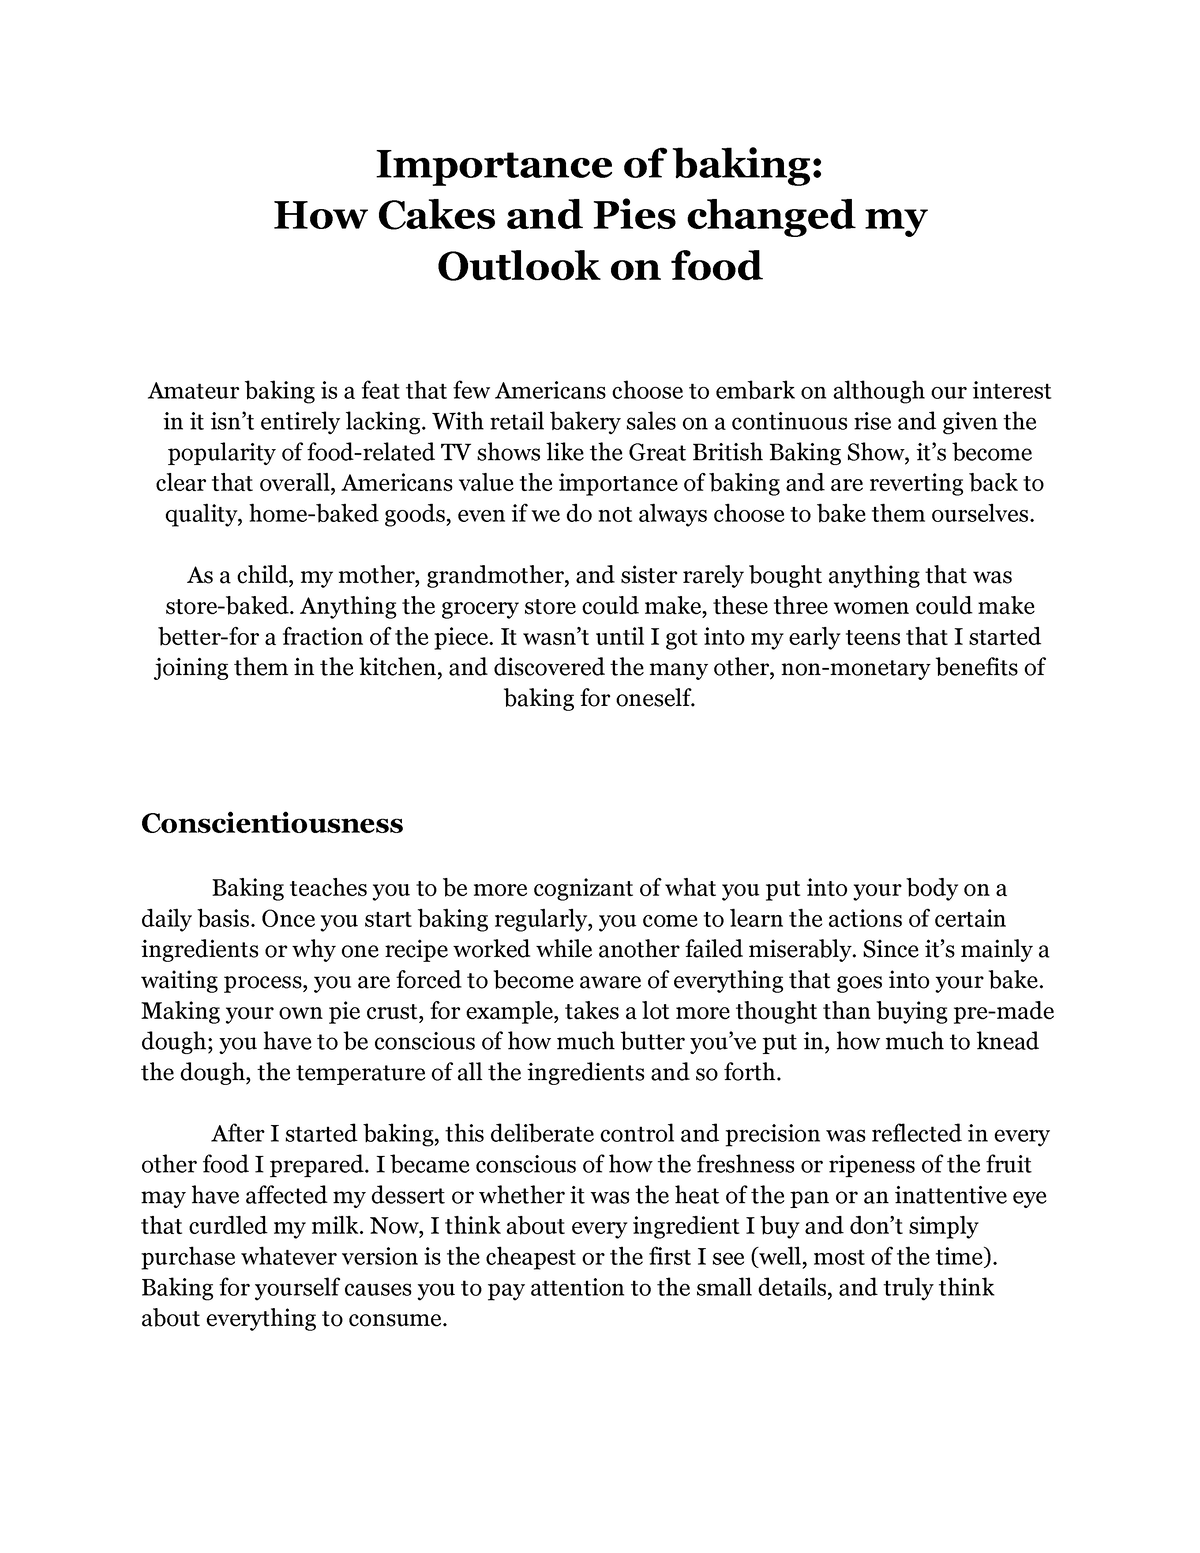 essay about loving baking